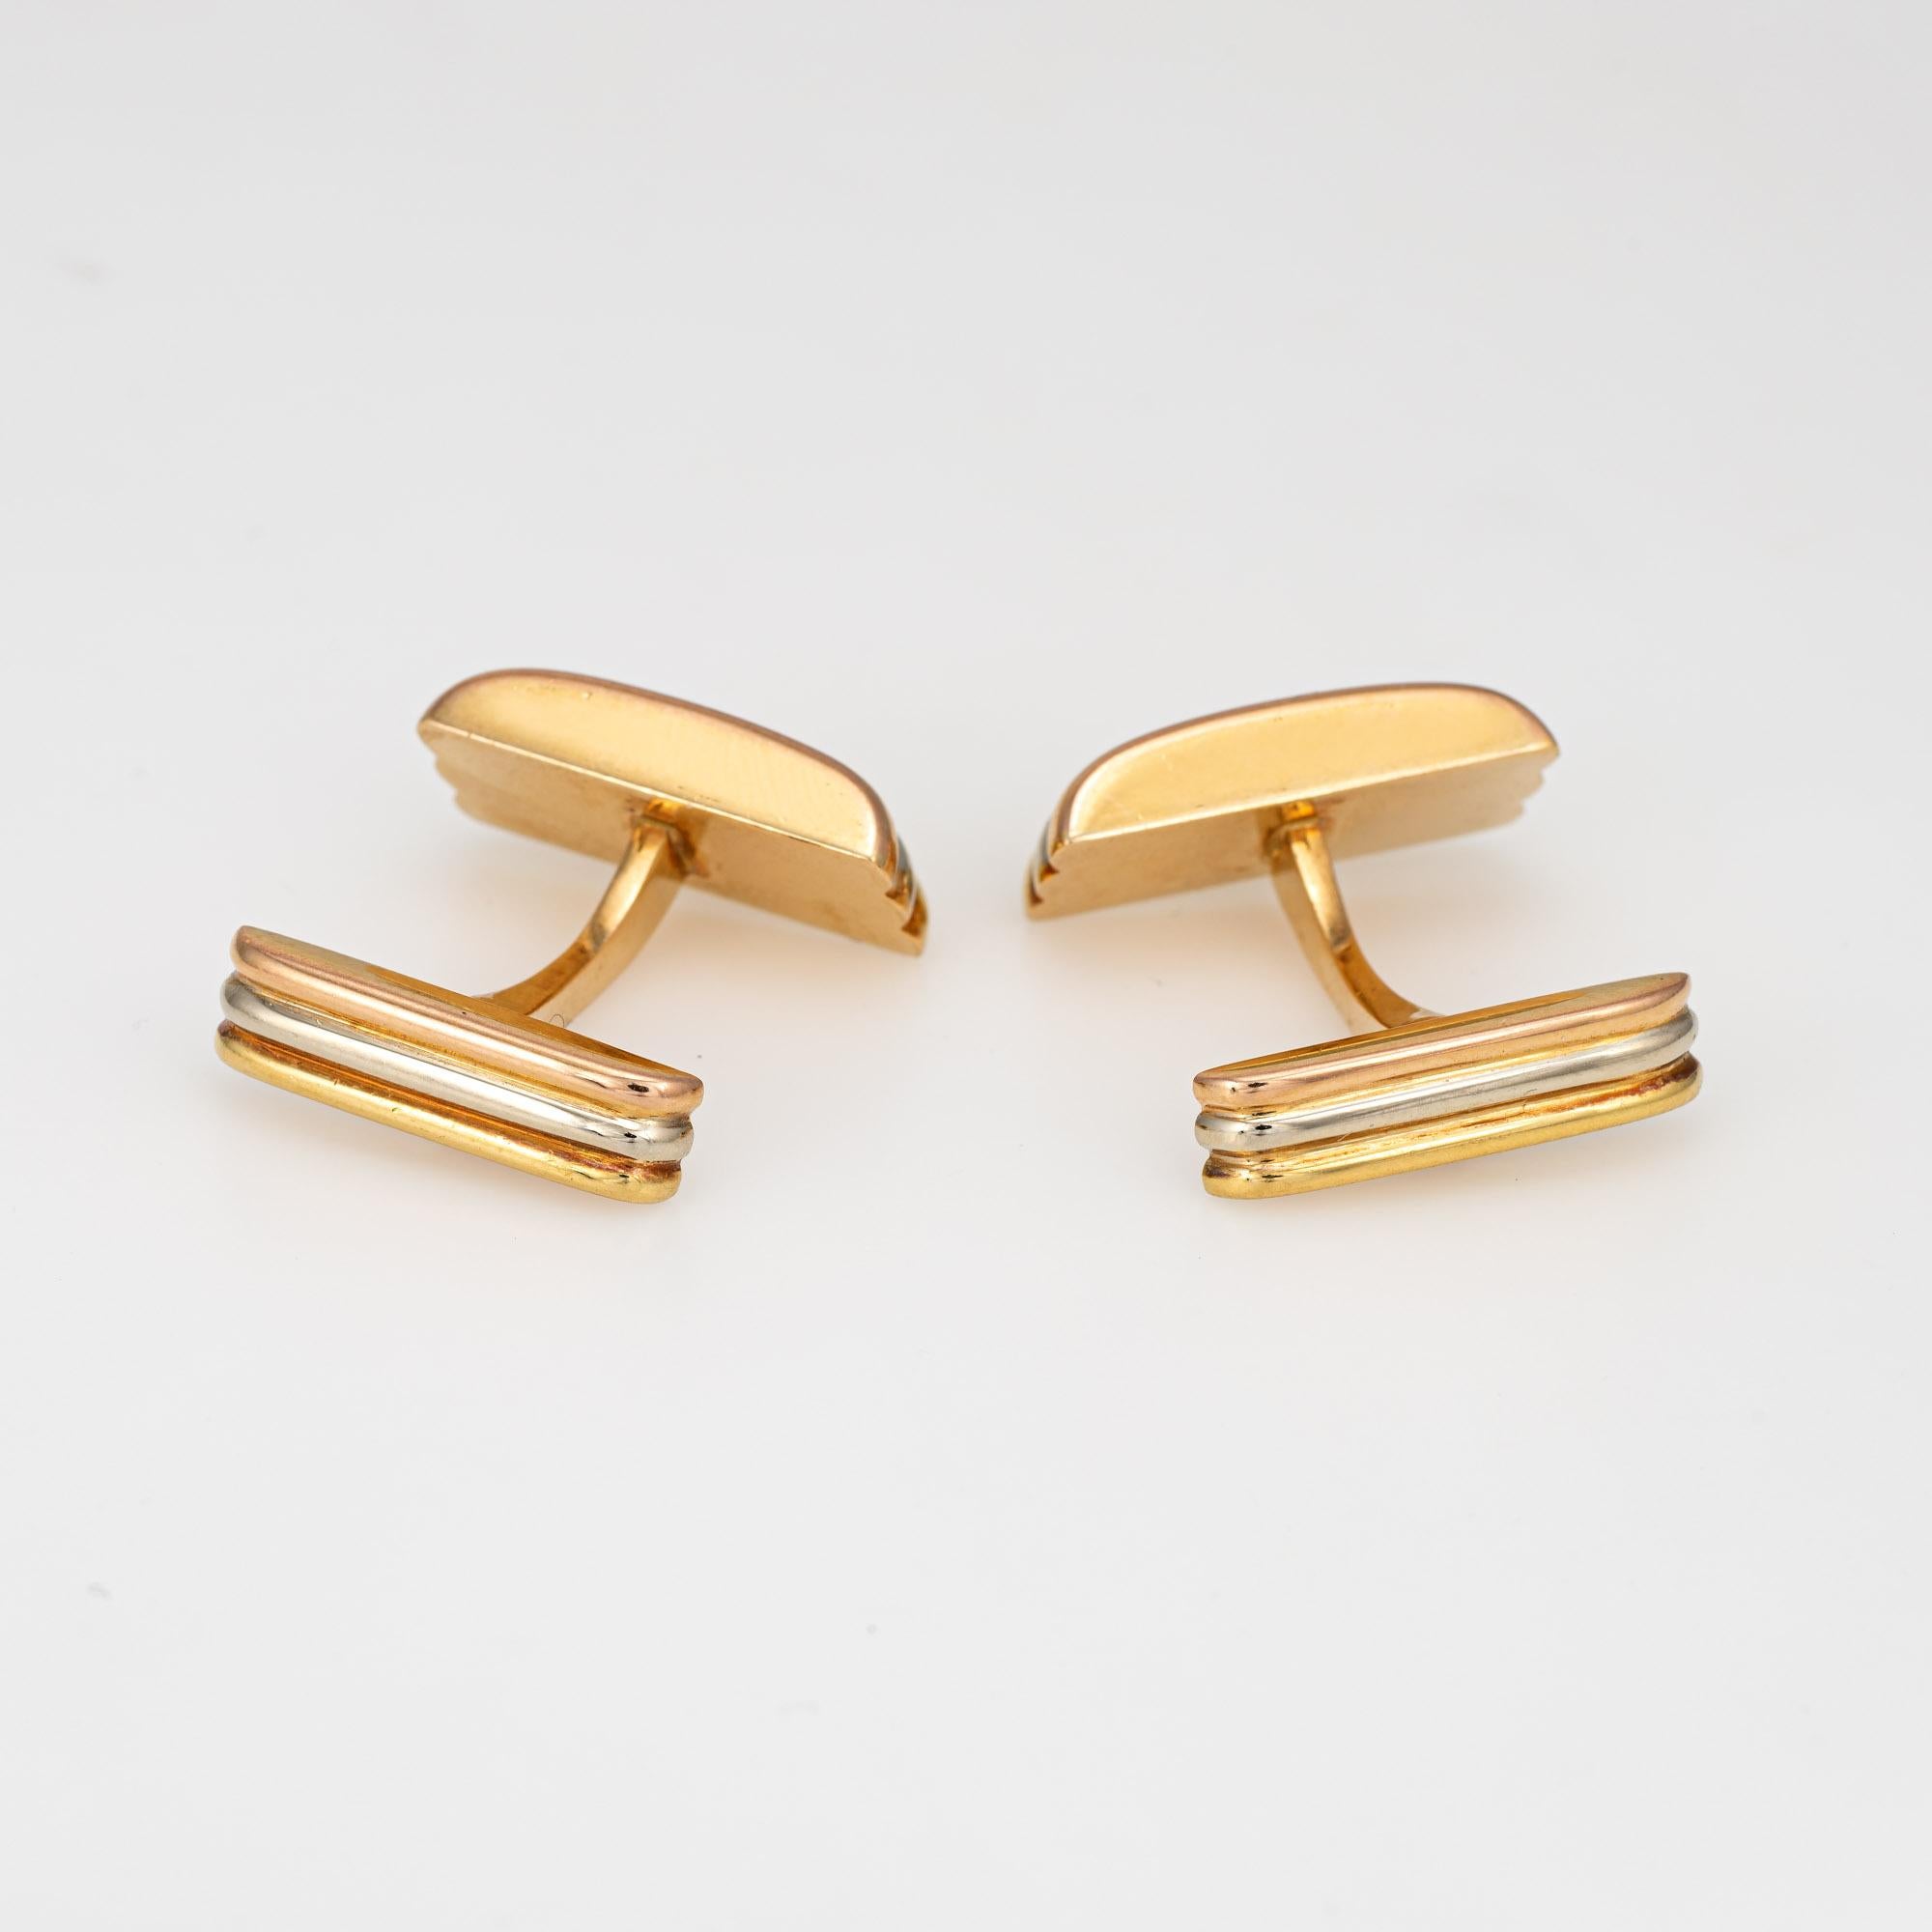 Out of production vintage Cartier Trinity cufflinks crafted in 18k yellow, rose & white gold (circa 1990s).  

The polished gold Cartier cufflinks feature the iconic Trinity design of yellow, white and rose gold, representing love, fidelity and